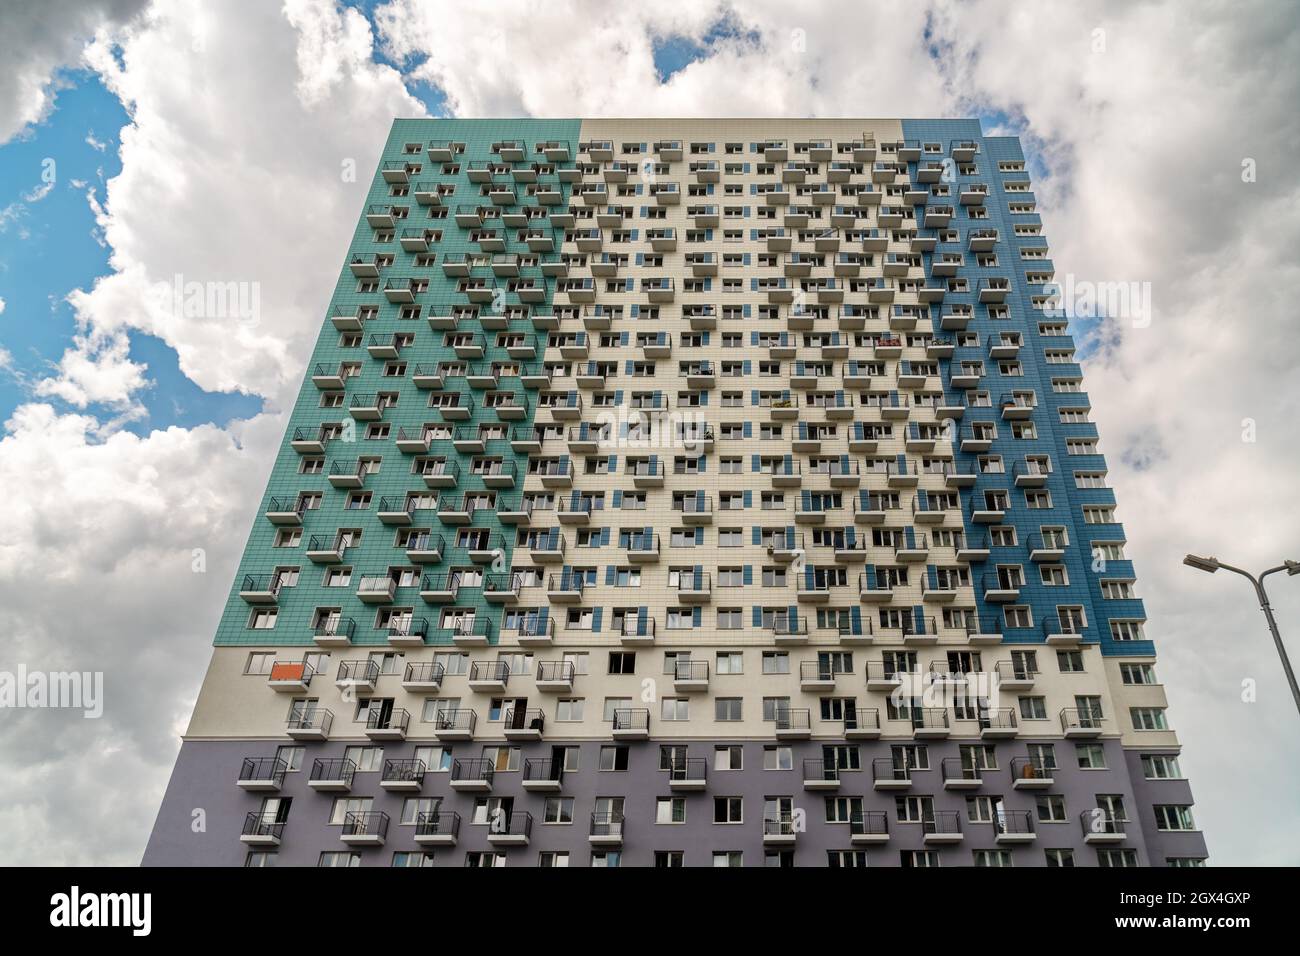 The facade of a multi-apartment new residential building with balconies and windows, painted in 4 colors against a cloudy sky. Stock Photo